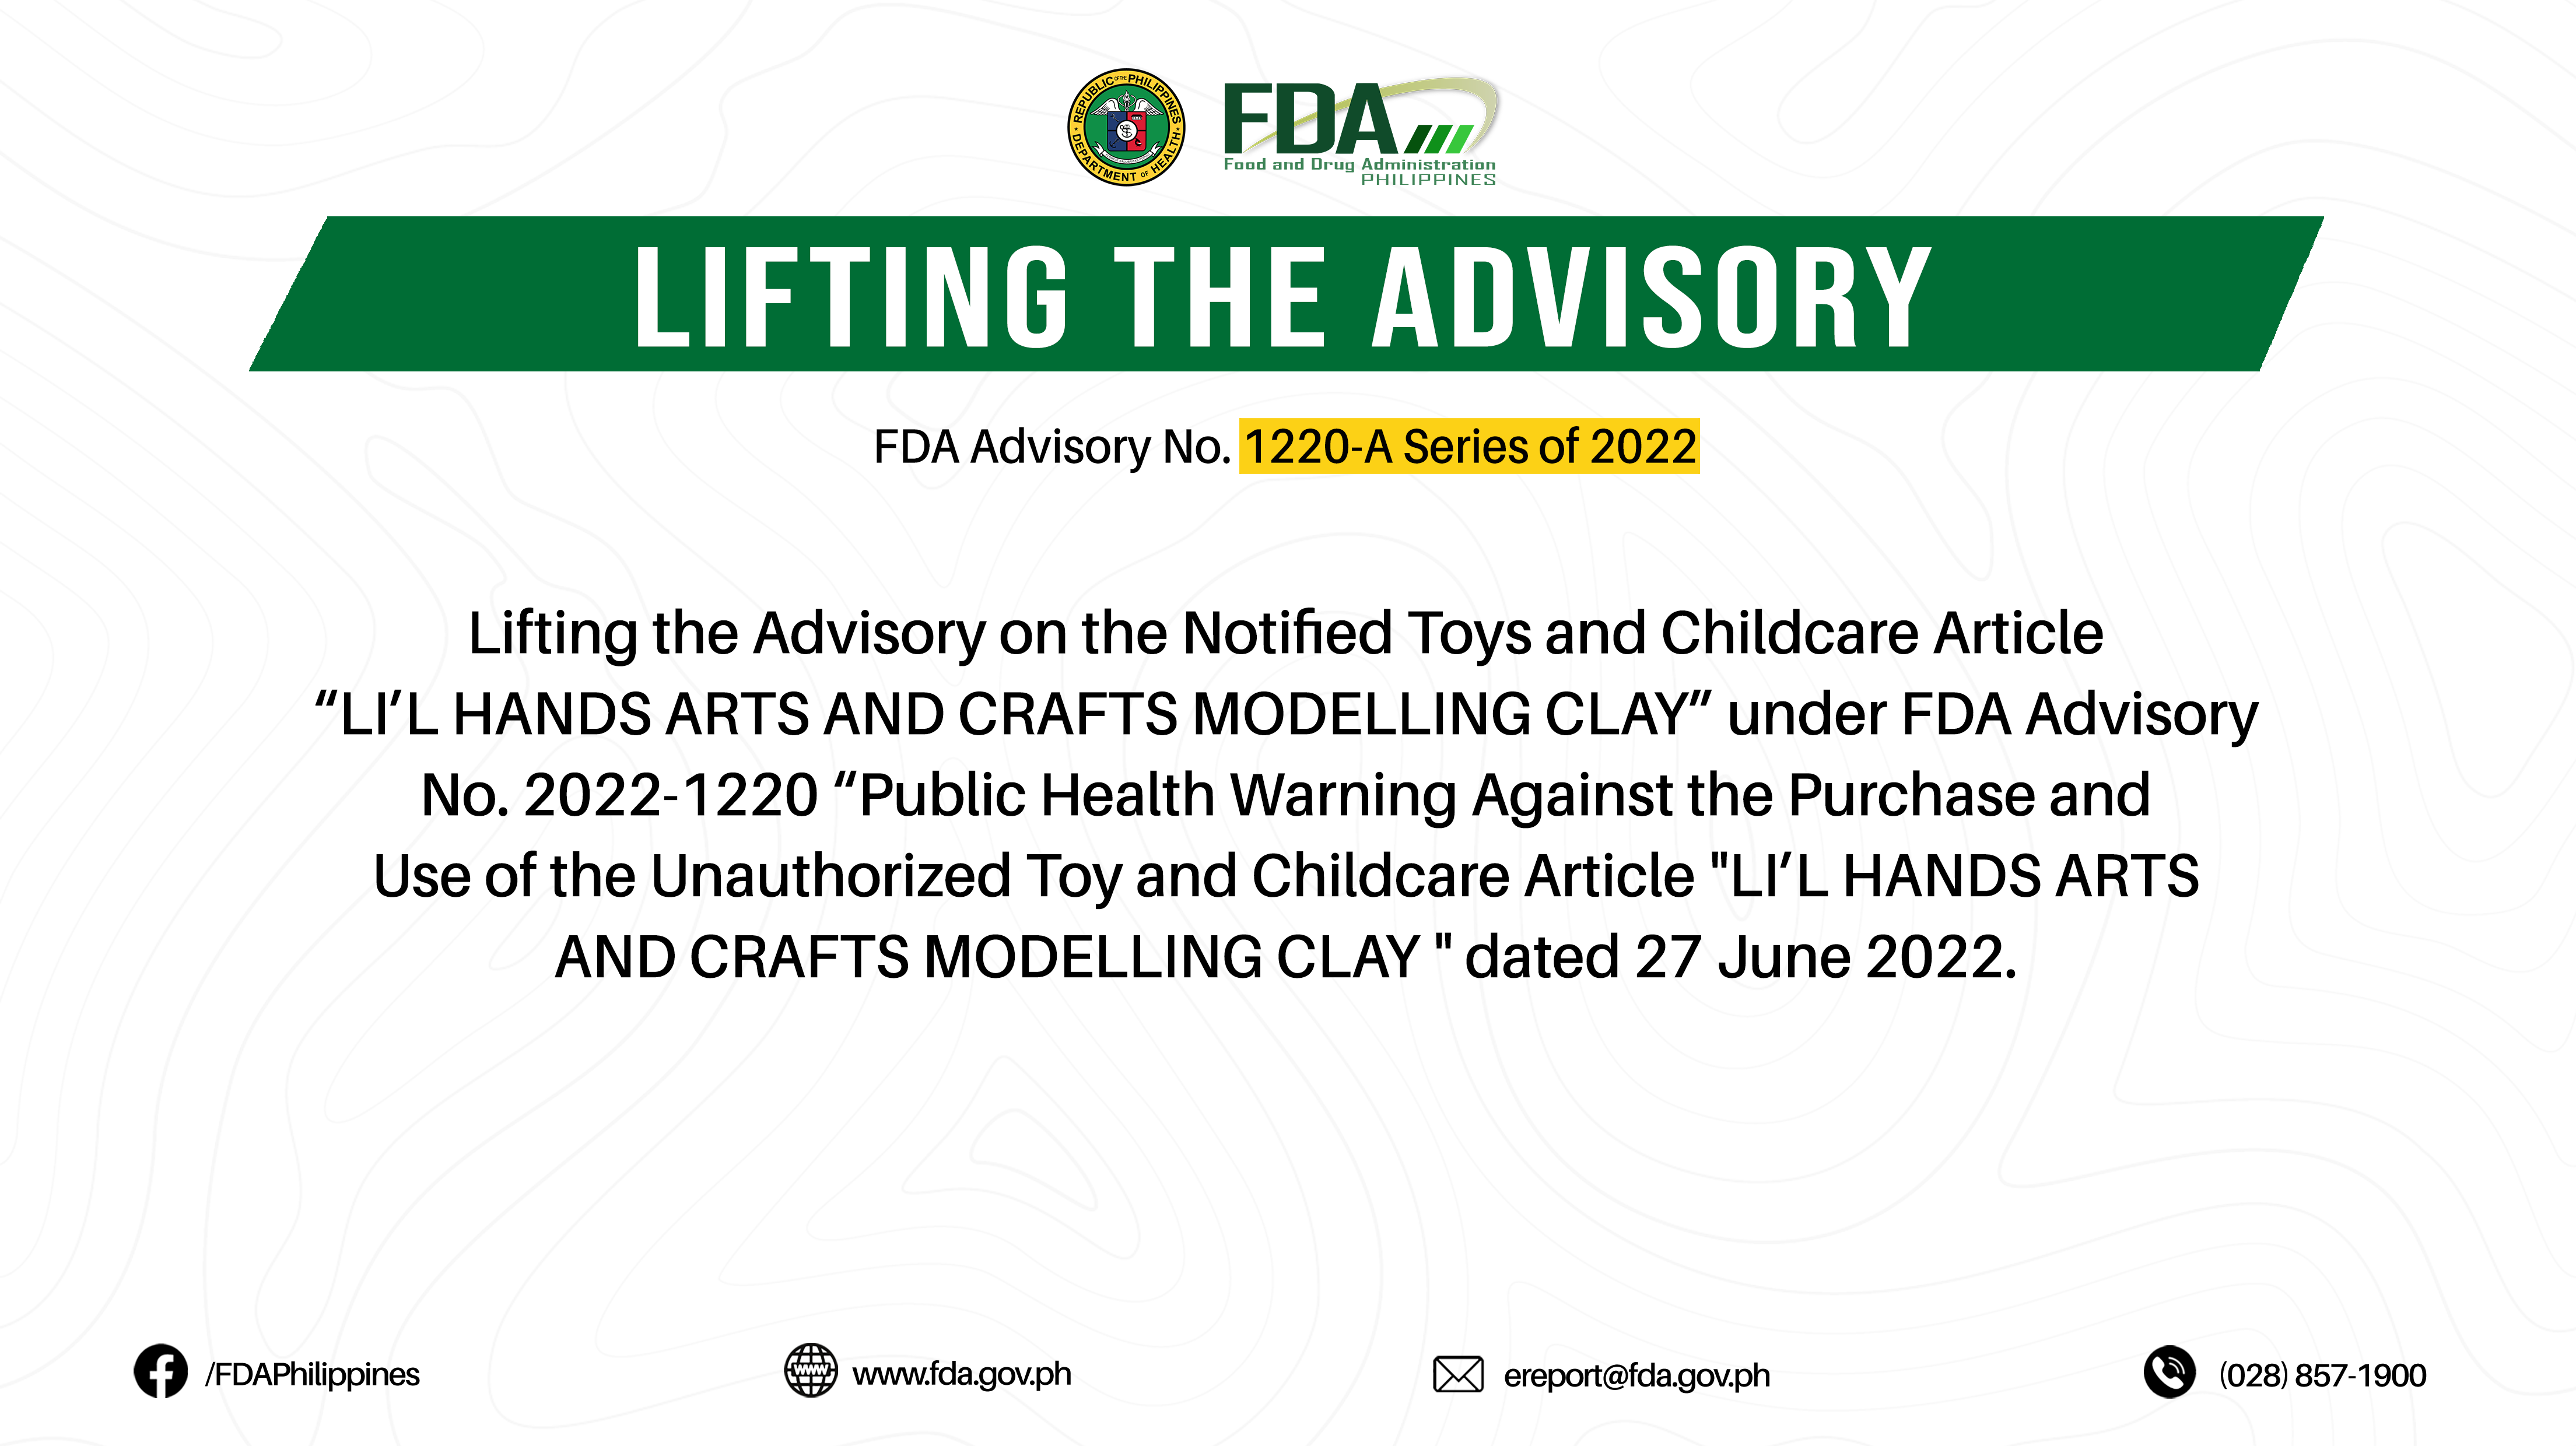 FDA Advisory No.2022-1220-A || Lifting the Advisory on the Notified Toys and Childcare Article “LI’L HANDS ARTS AND CRAFTS MODELLING CLAY” under FDA Advisory No. 2022-1220 “Public Health Warning Against the Purchase and Use of the Unauthorized Toy and Childcare Article “LI’L HANDS ARTS AND CRAFTS MODELLING CLAY ” dated 27 June 2022.